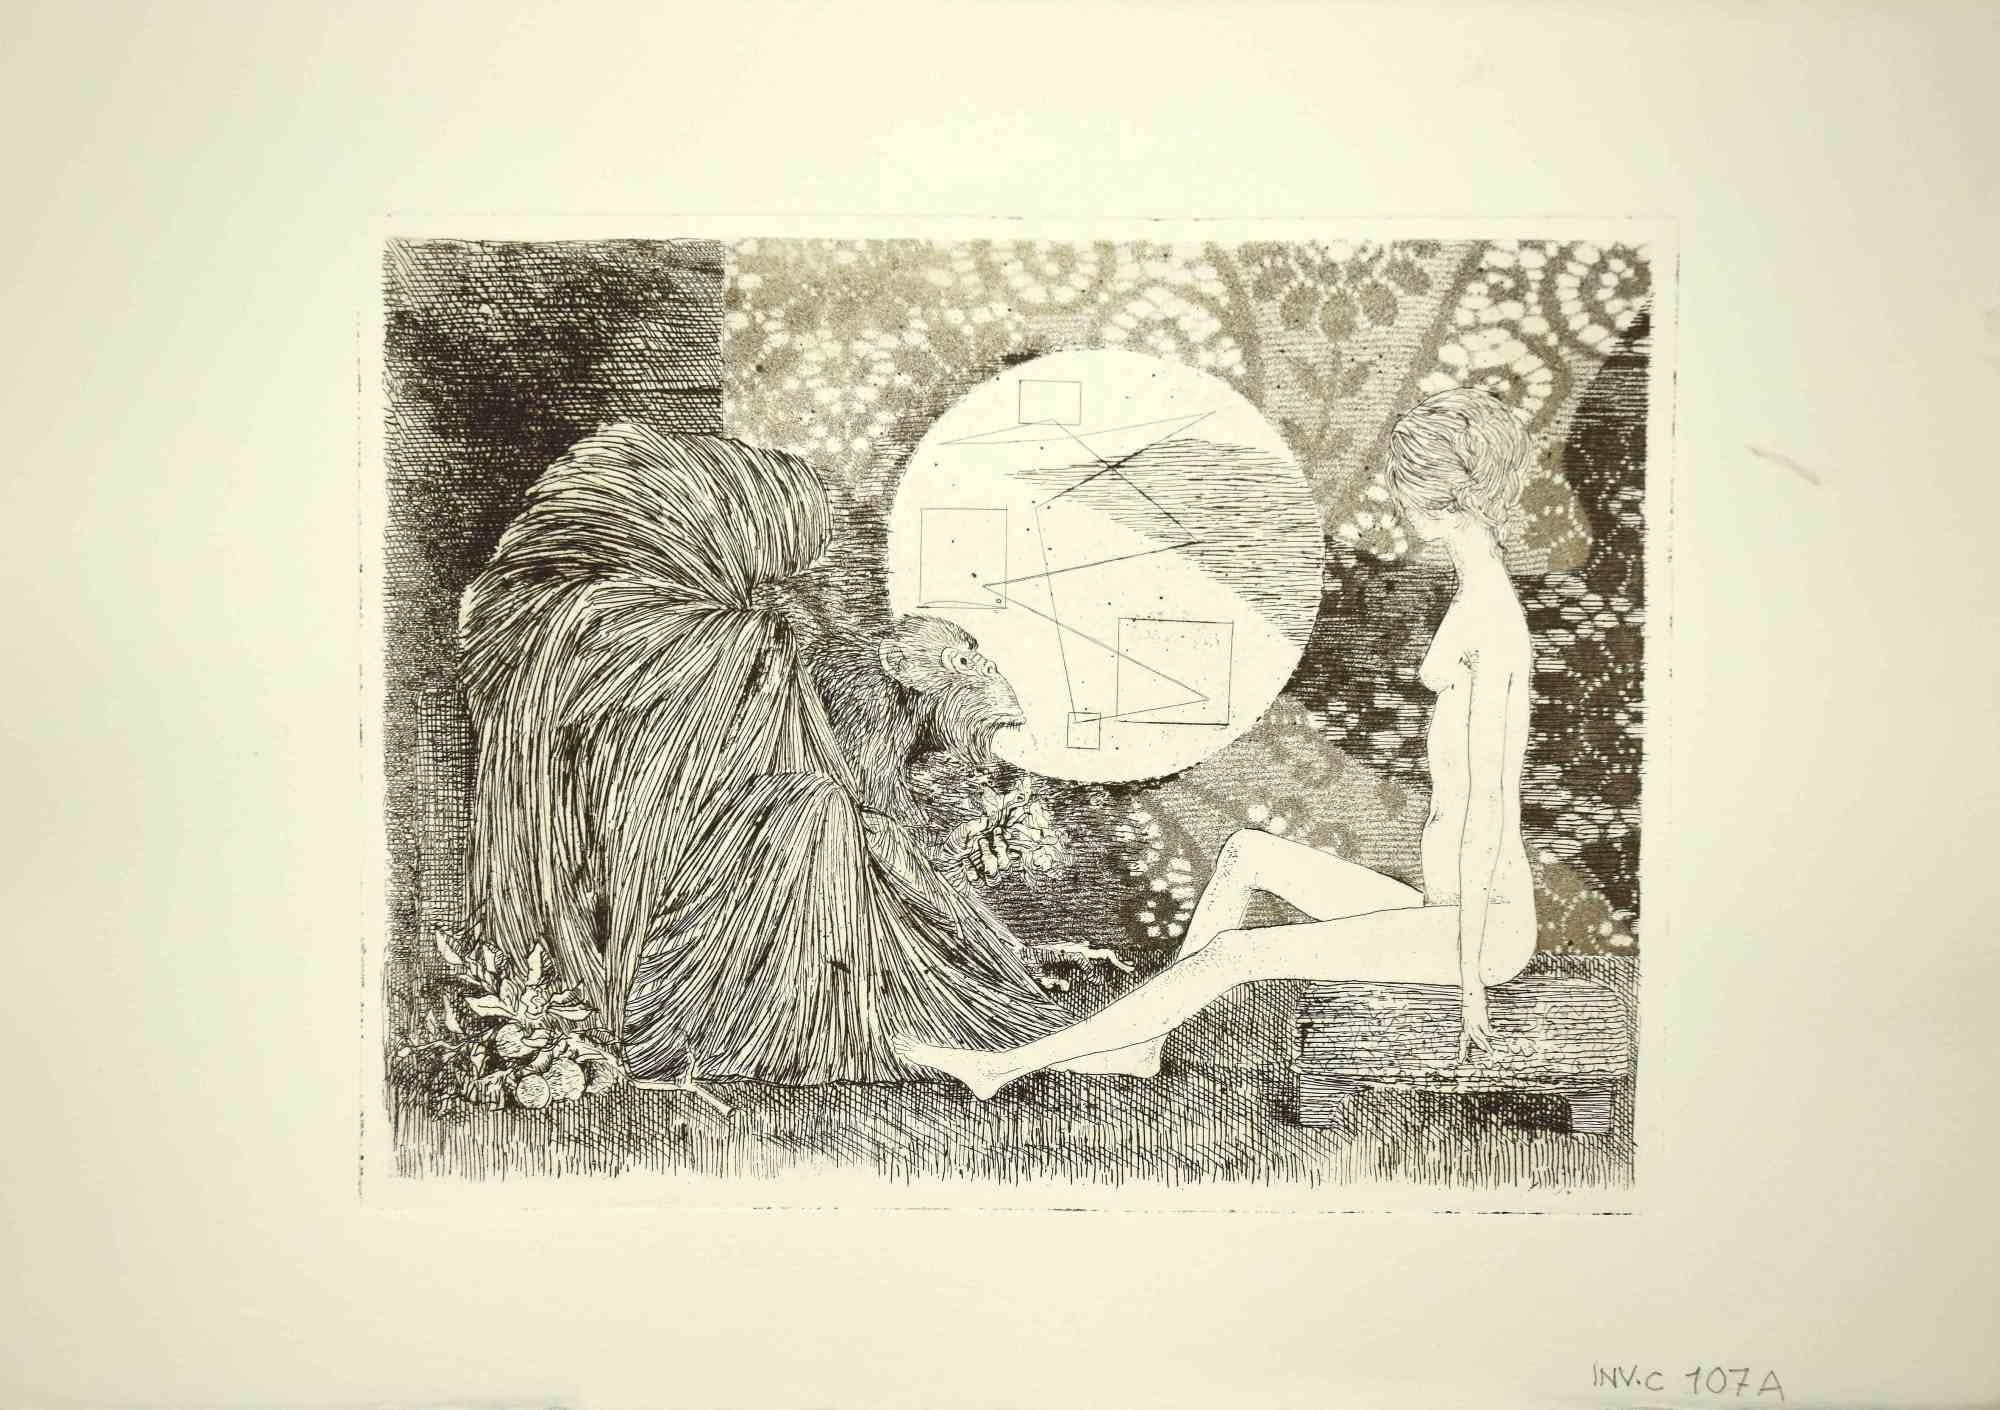 Sybil in conversation is an original etching print realized by Leo Guida in the 1970s.

Good condition.

Leo Guida  (1992 - 2017). Sensitive to current issues, artistic movements and historical techniques, Leo Guida has been able to weave with many